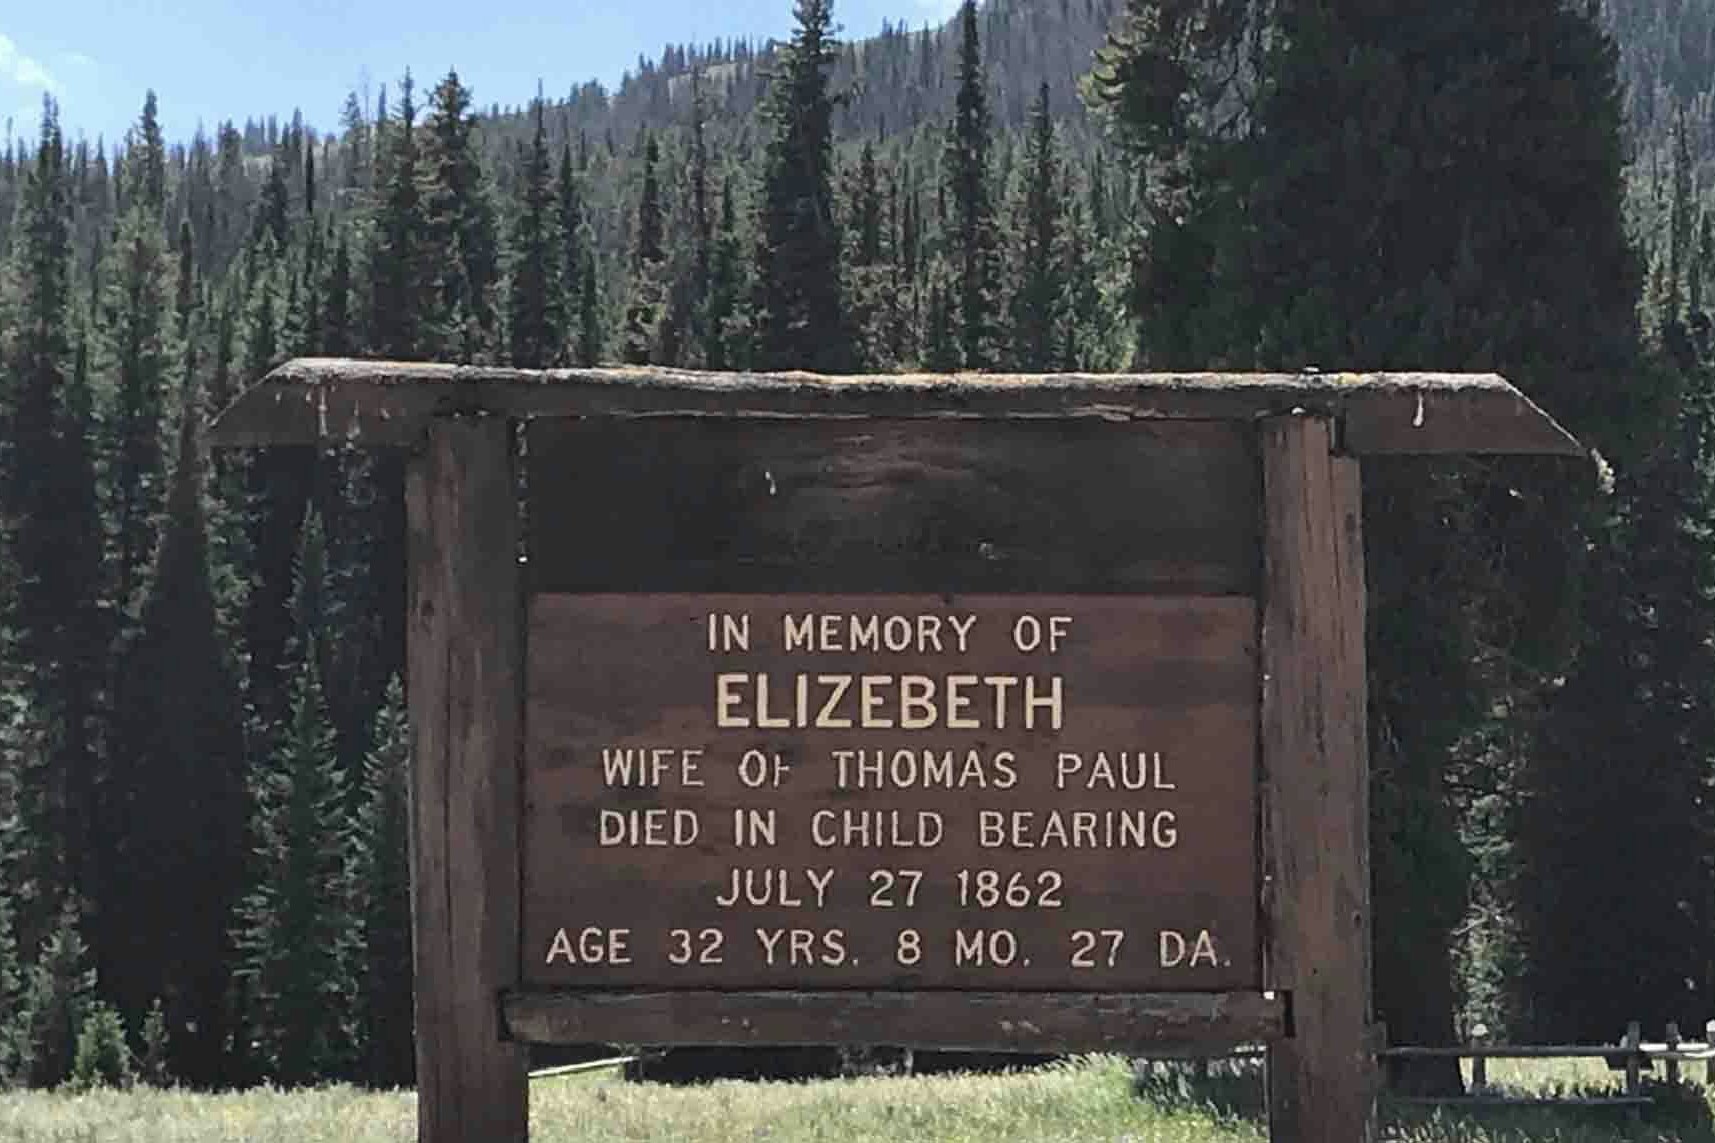 Elizabeth Paul was an emigrant from Indiana who died in 1862 while crossing Wyoming on the Lander Cutoff. Her gravesite is located near La Barge.